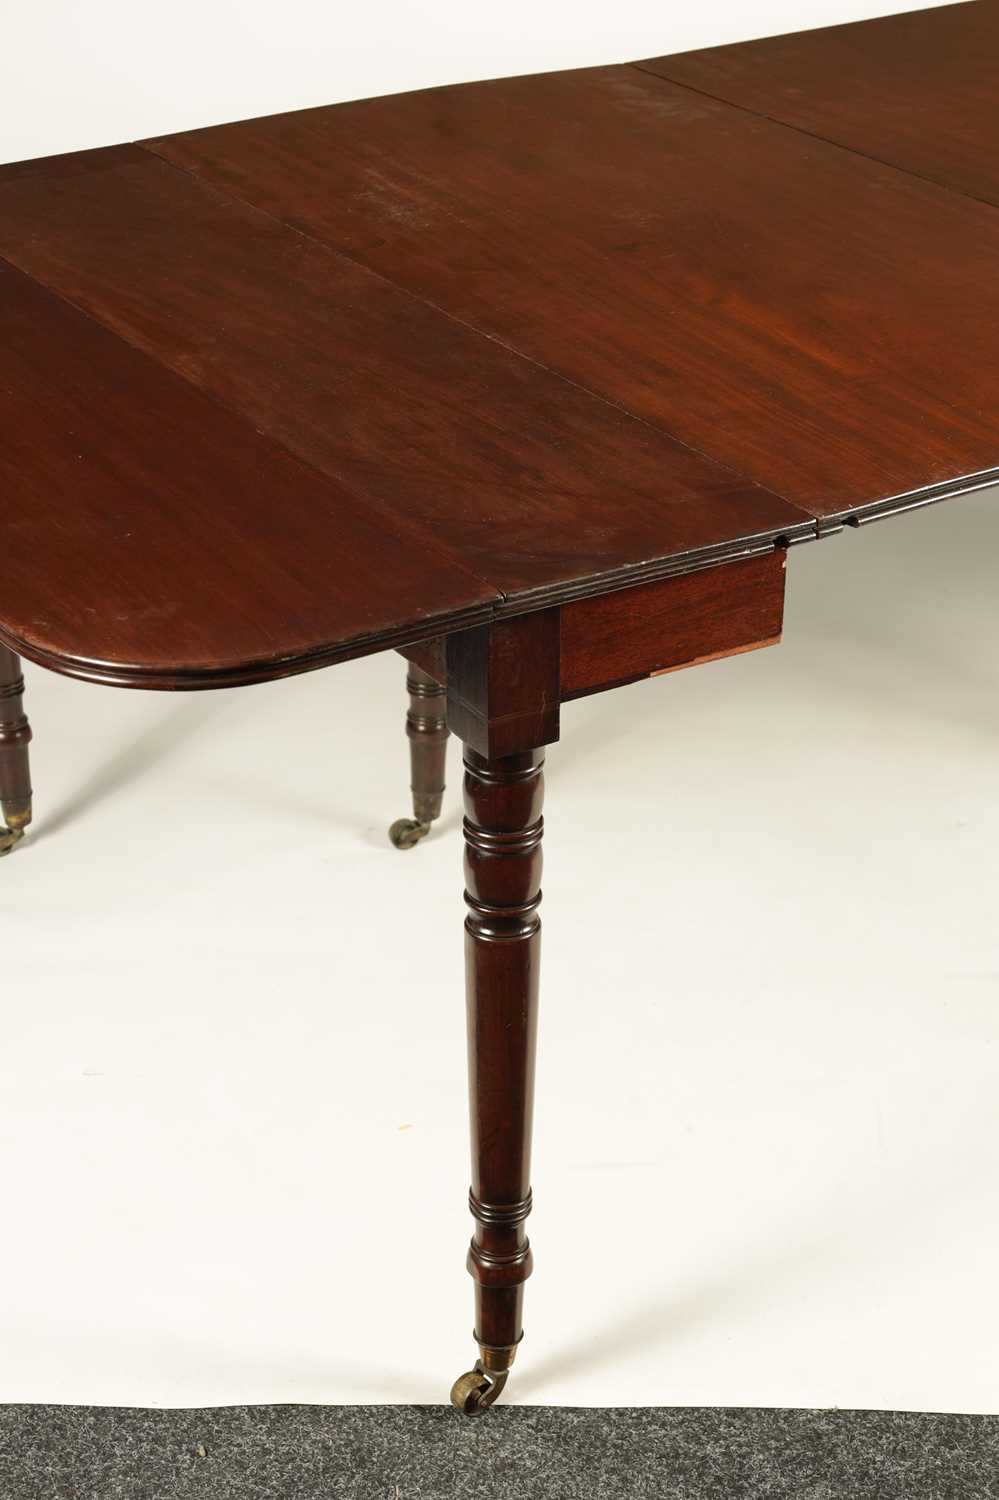 ROSS DUBLIN A GEORGE III FIGURED MAHOGANY SCISSOR ACTION EXTENDING DINING TABLE - Image 4 of 8